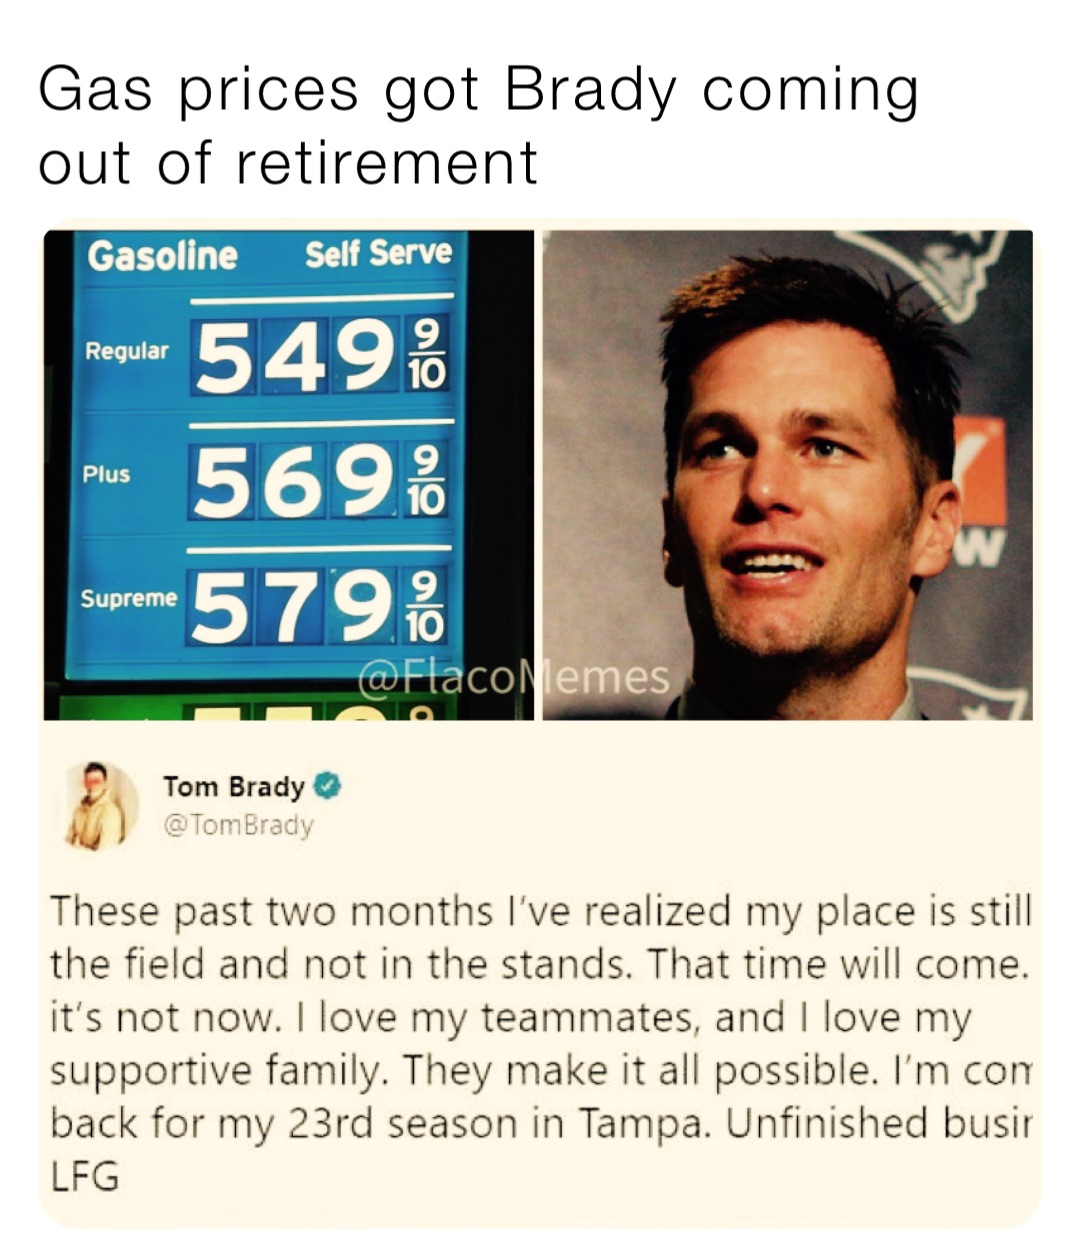 Gas prices got Brady coming out of retirement